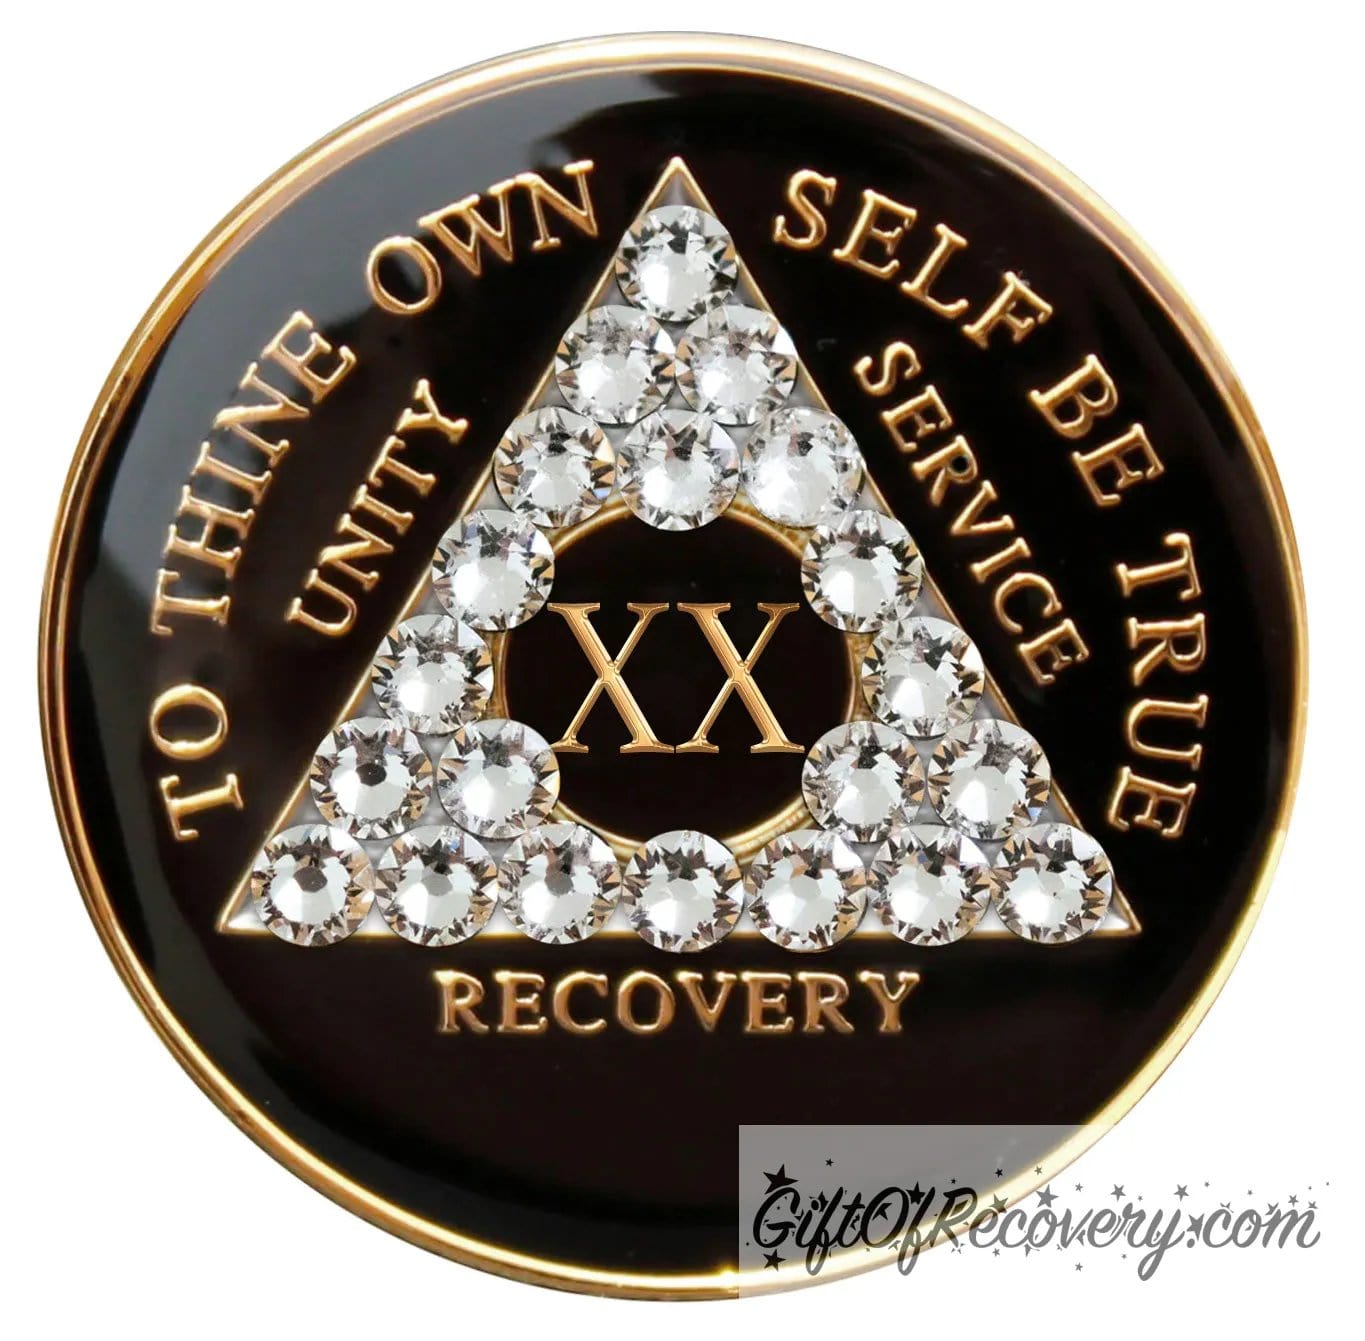 20 year AA medallion black onyx with 21 clear genuine crystals in the shape of the triangle, to thine own self be true, unity, service, recovery, and the roman numeral are embossed with 14k gold-plated brass, the recovery medallion is sealed with resin for a glossy finish that will last and is scratch proof.